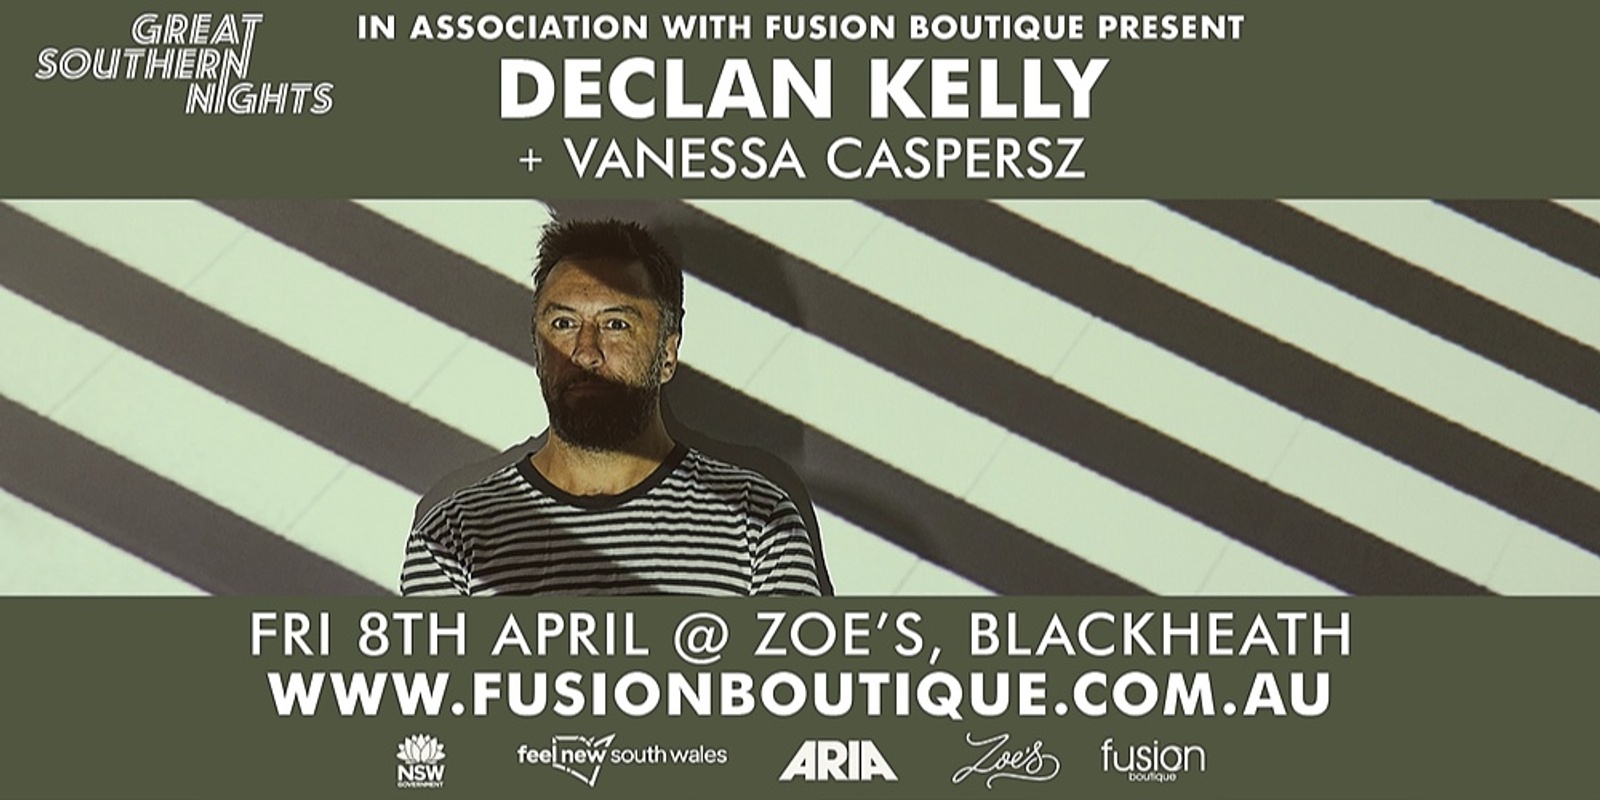 Banner image for GREAT SOUTHERN NIGHTS & FUSION BOUTIQUE PRESENT DECLAN KELLY (DUO) + VANESSA CASPERSZ Live at the Zoe's, Blackheath, Blue Mountains